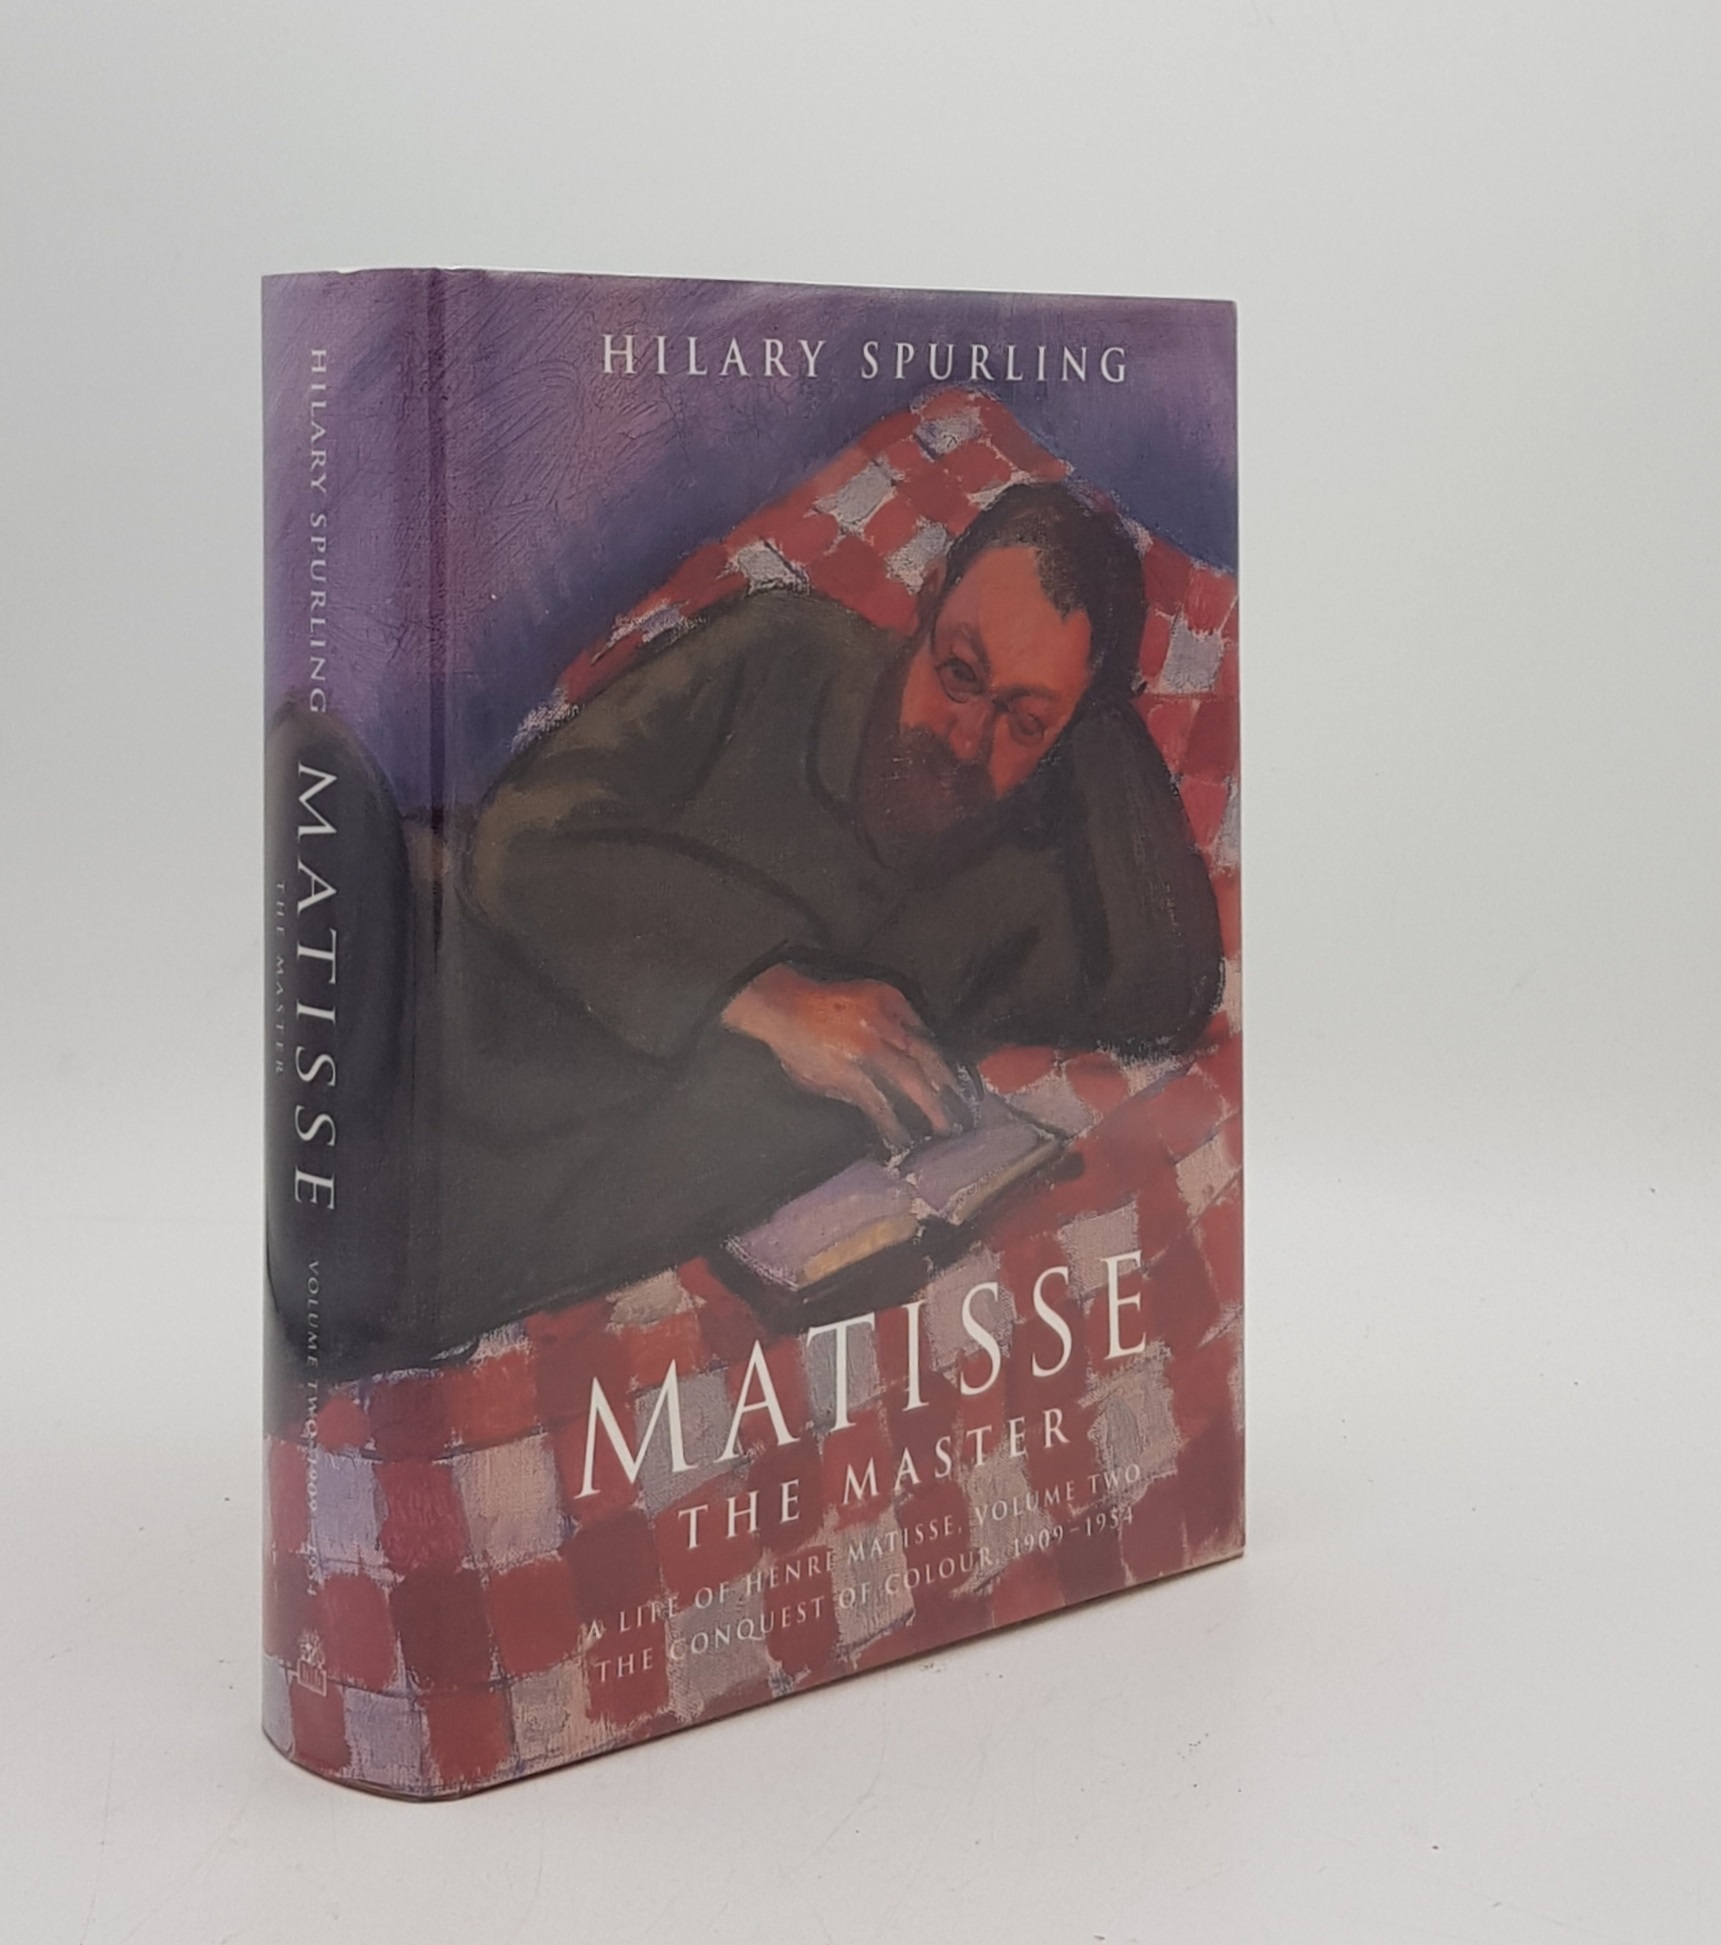 MATISSE THE MASTER A Life of Henri Matisse Volume Two 1909-1954 - SPURLING Hilary